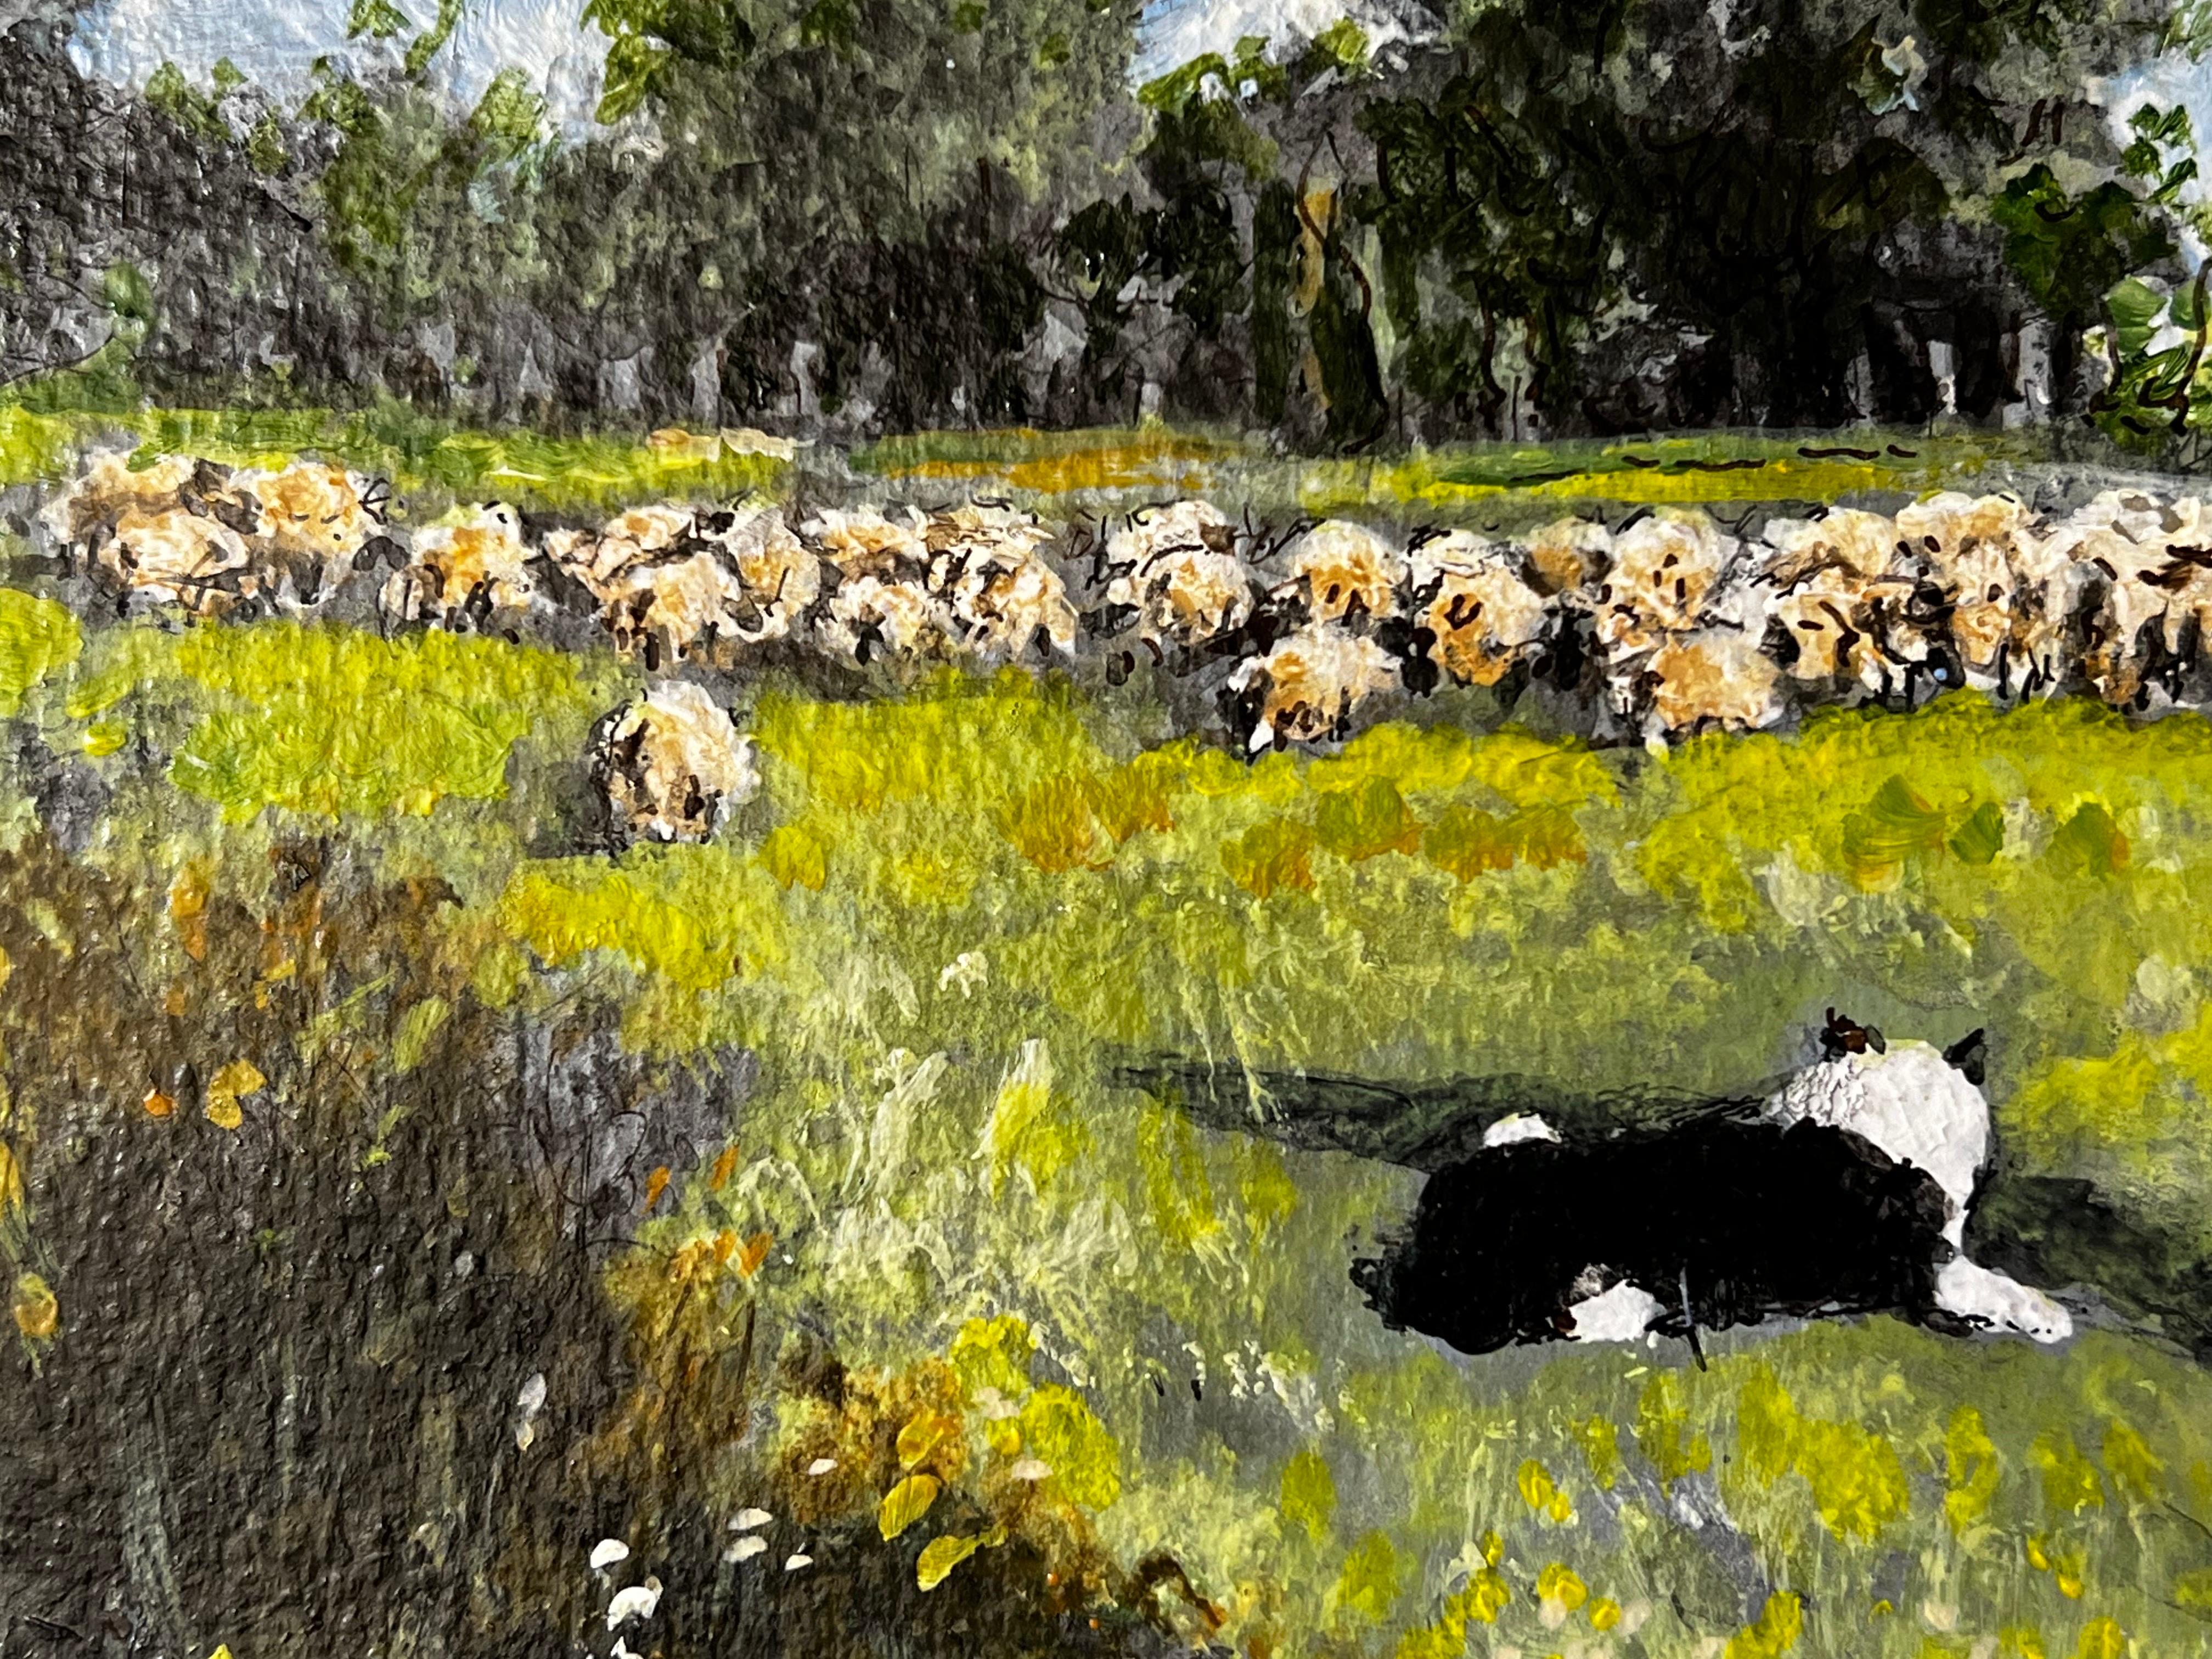 Artist/ School: Norman A.Olley (British, 20th Century) dated 1993 and inscribed verso

Title - The Shepherd and his flock

Medium: gouache/watercolour/ ink/ pencil on artist paper, unframed 

Painting : 10 x 14 inches

Provenance: all the paintings